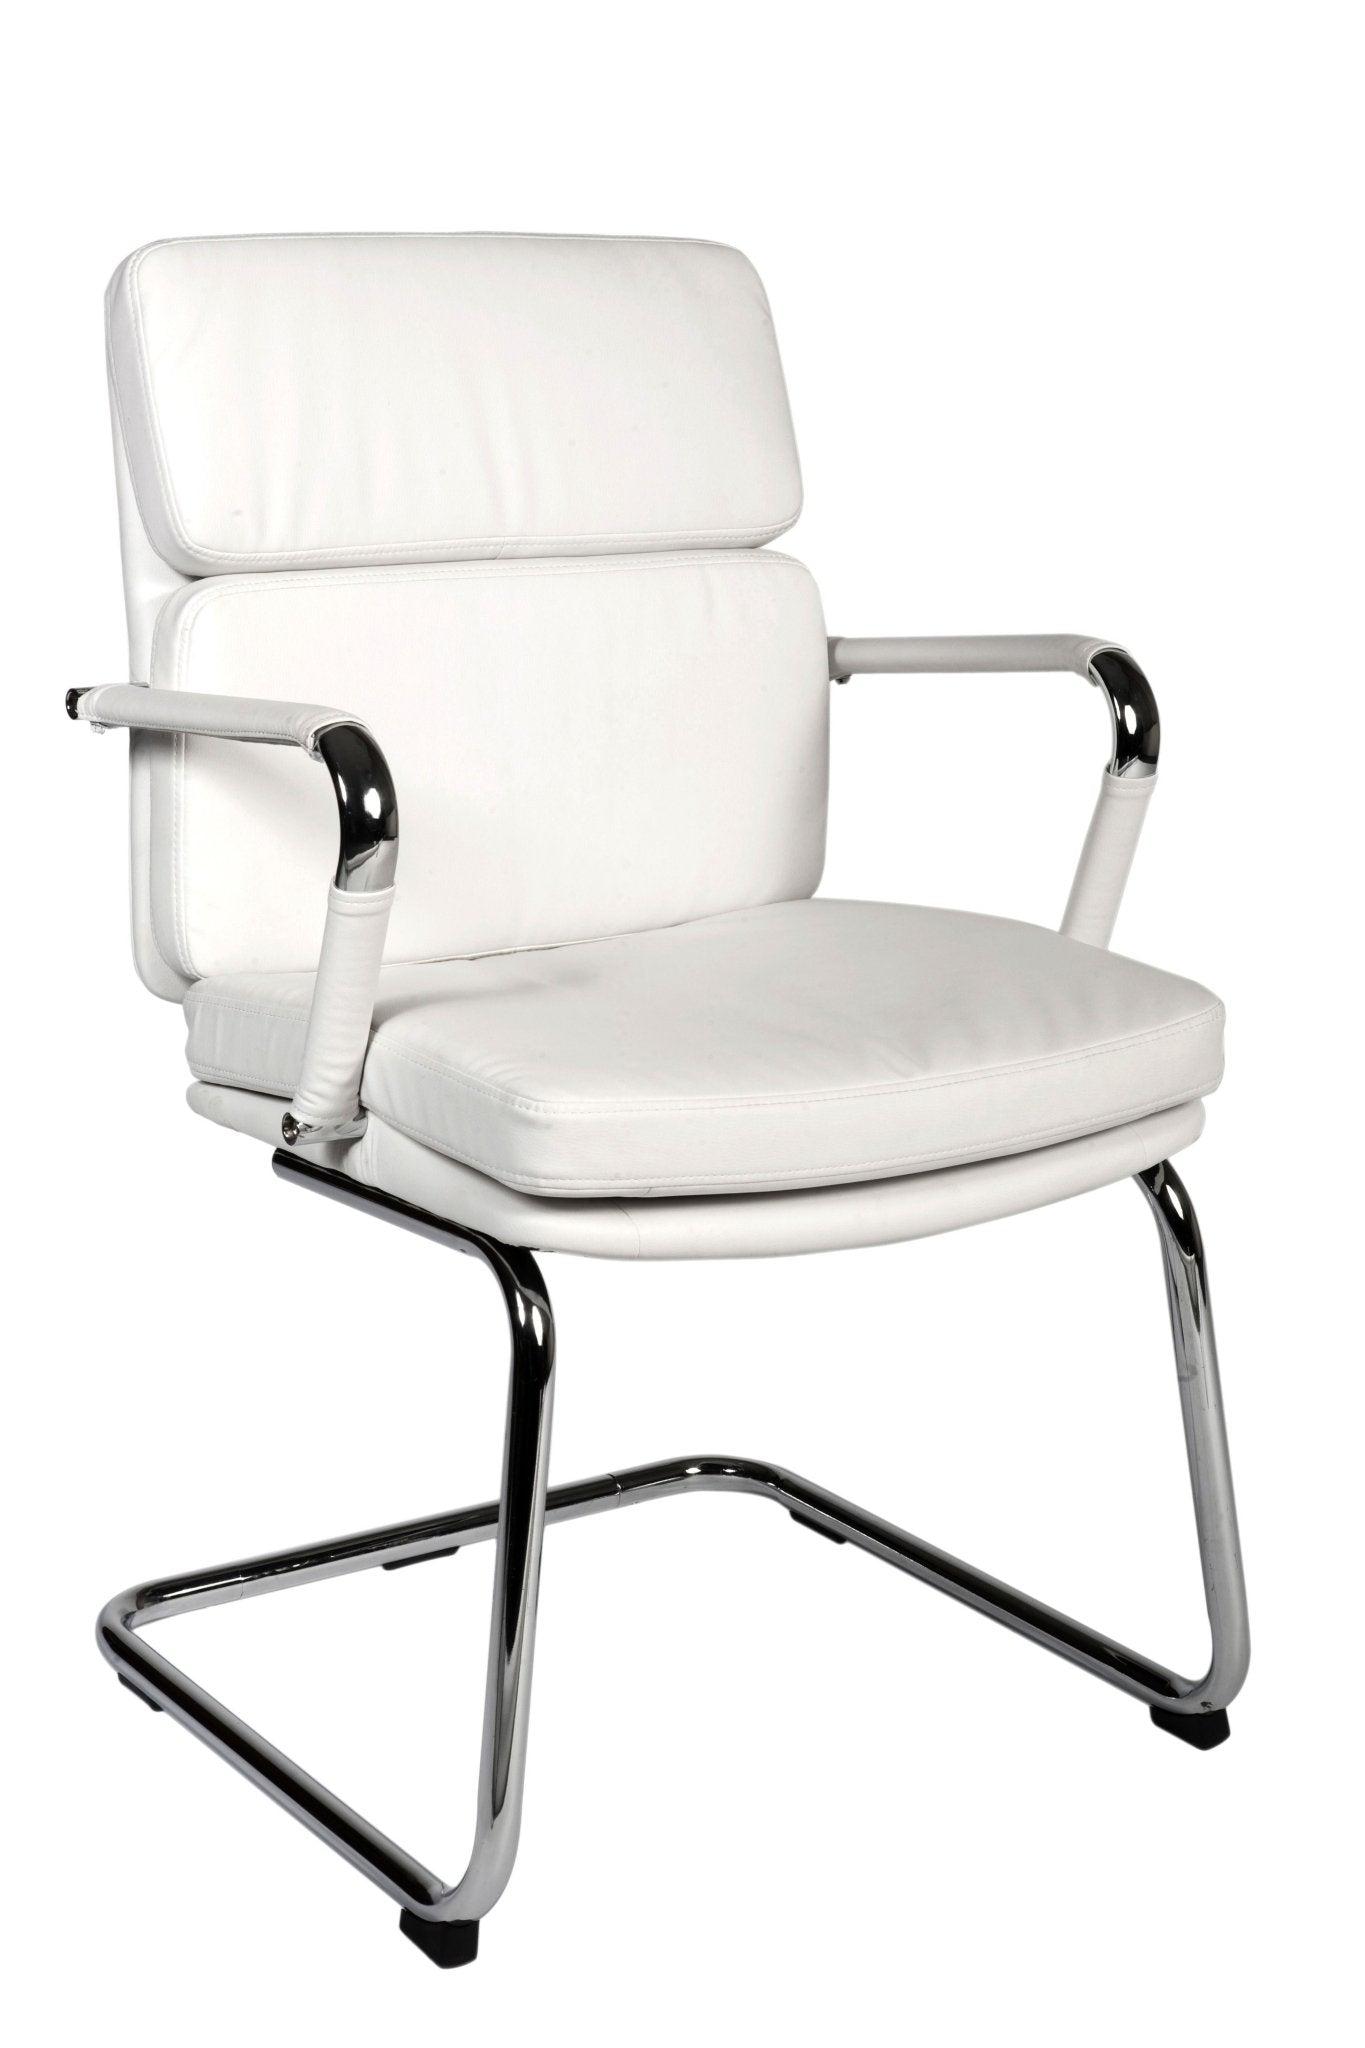 Deco visitor reception chair (white) - image 1